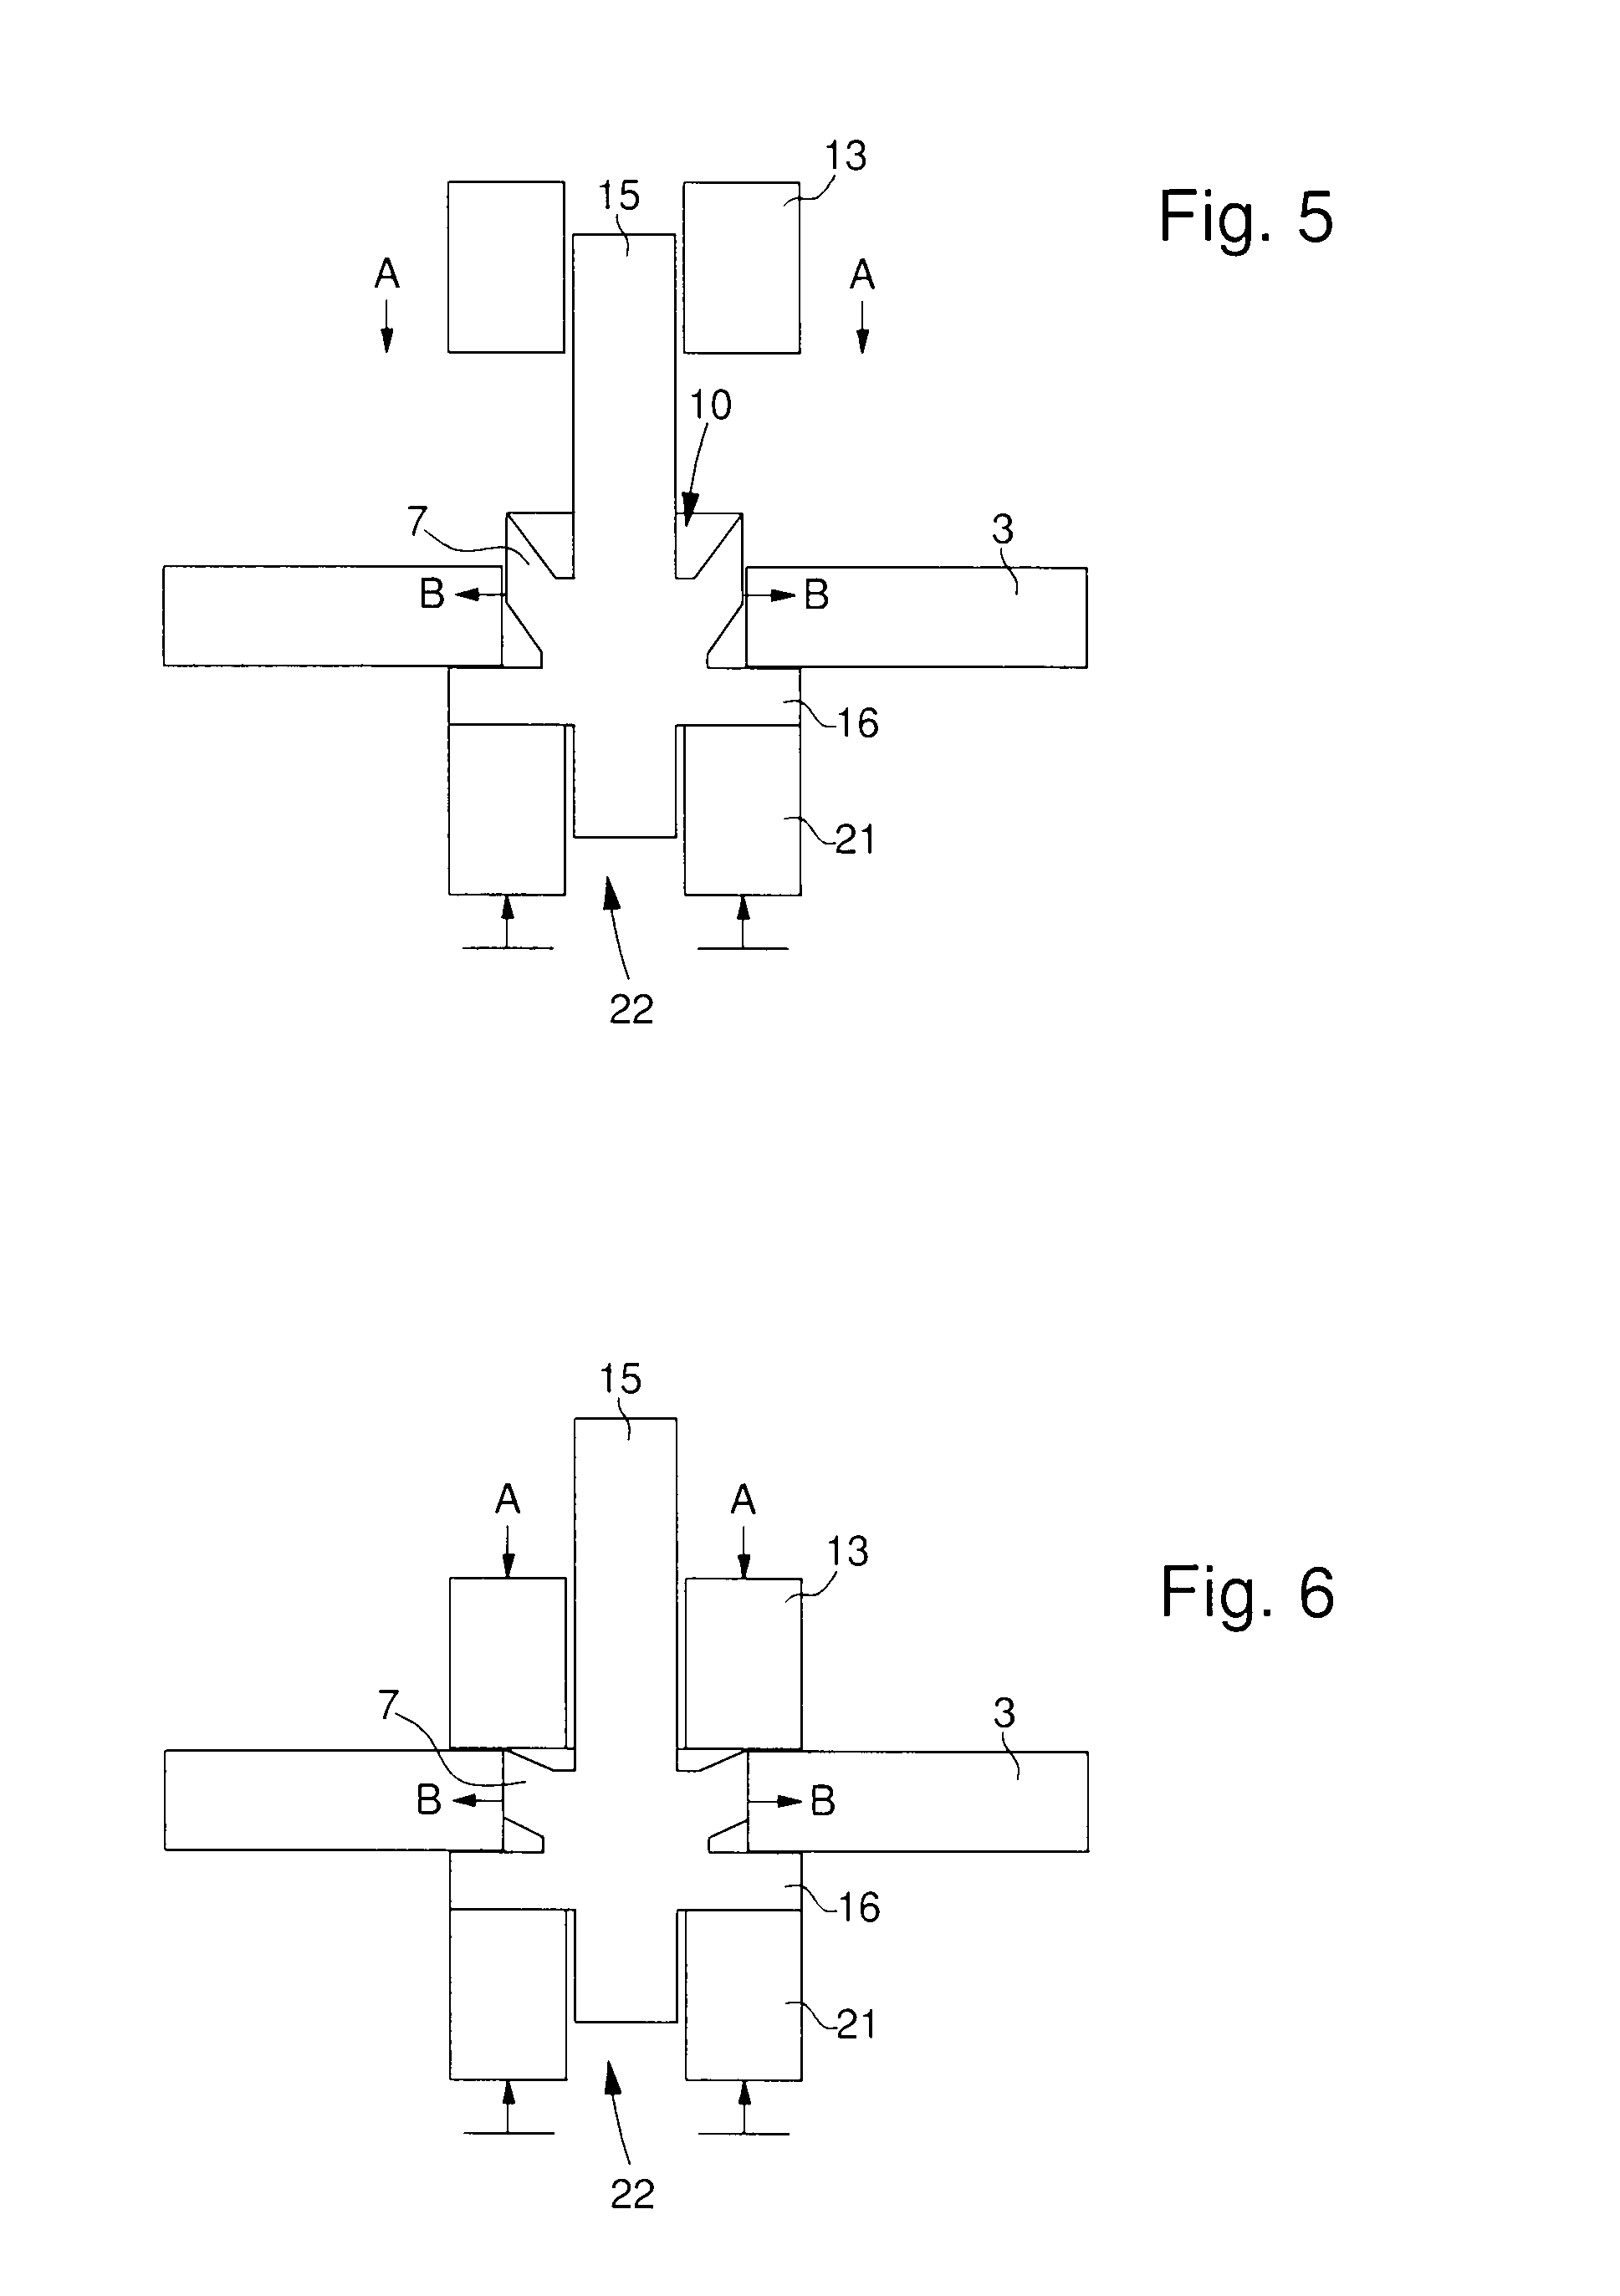 Assembly of a part that has no plastic domain